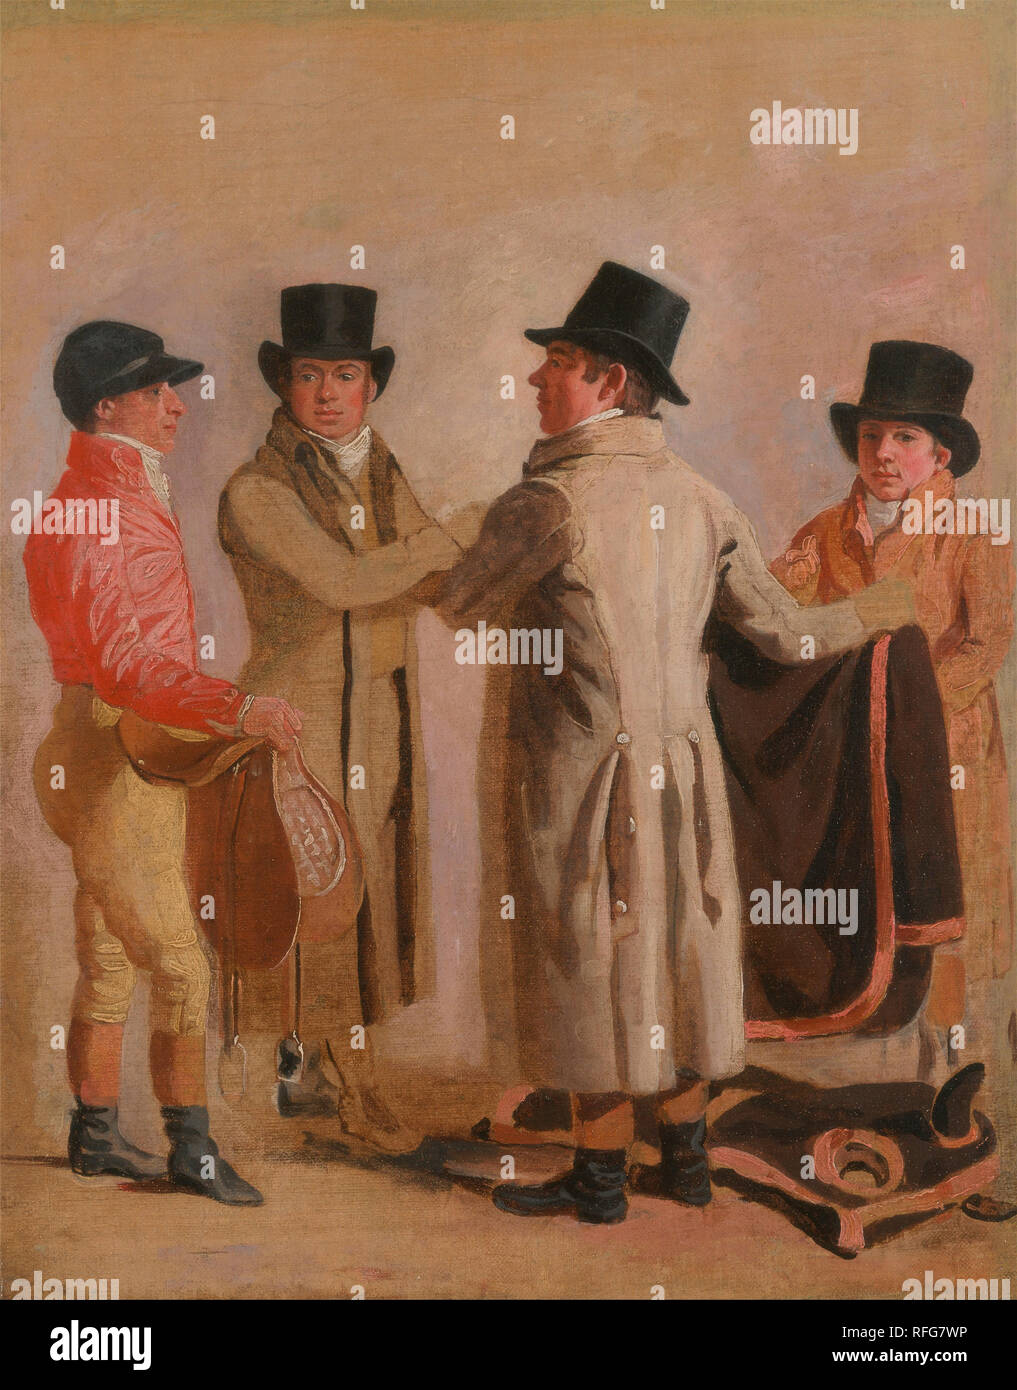 The Jockey Frank Buckle, the Owner-Breeder John Wastell, his Trainer Robert Robson, and a Stable-lad. Date/Period: 1802. Painting. Oil on canvas. Height: 464 mm (18.26 in); Width: 371 mm (14.60 in). Author: Benjamin Marshall. Stock Photo